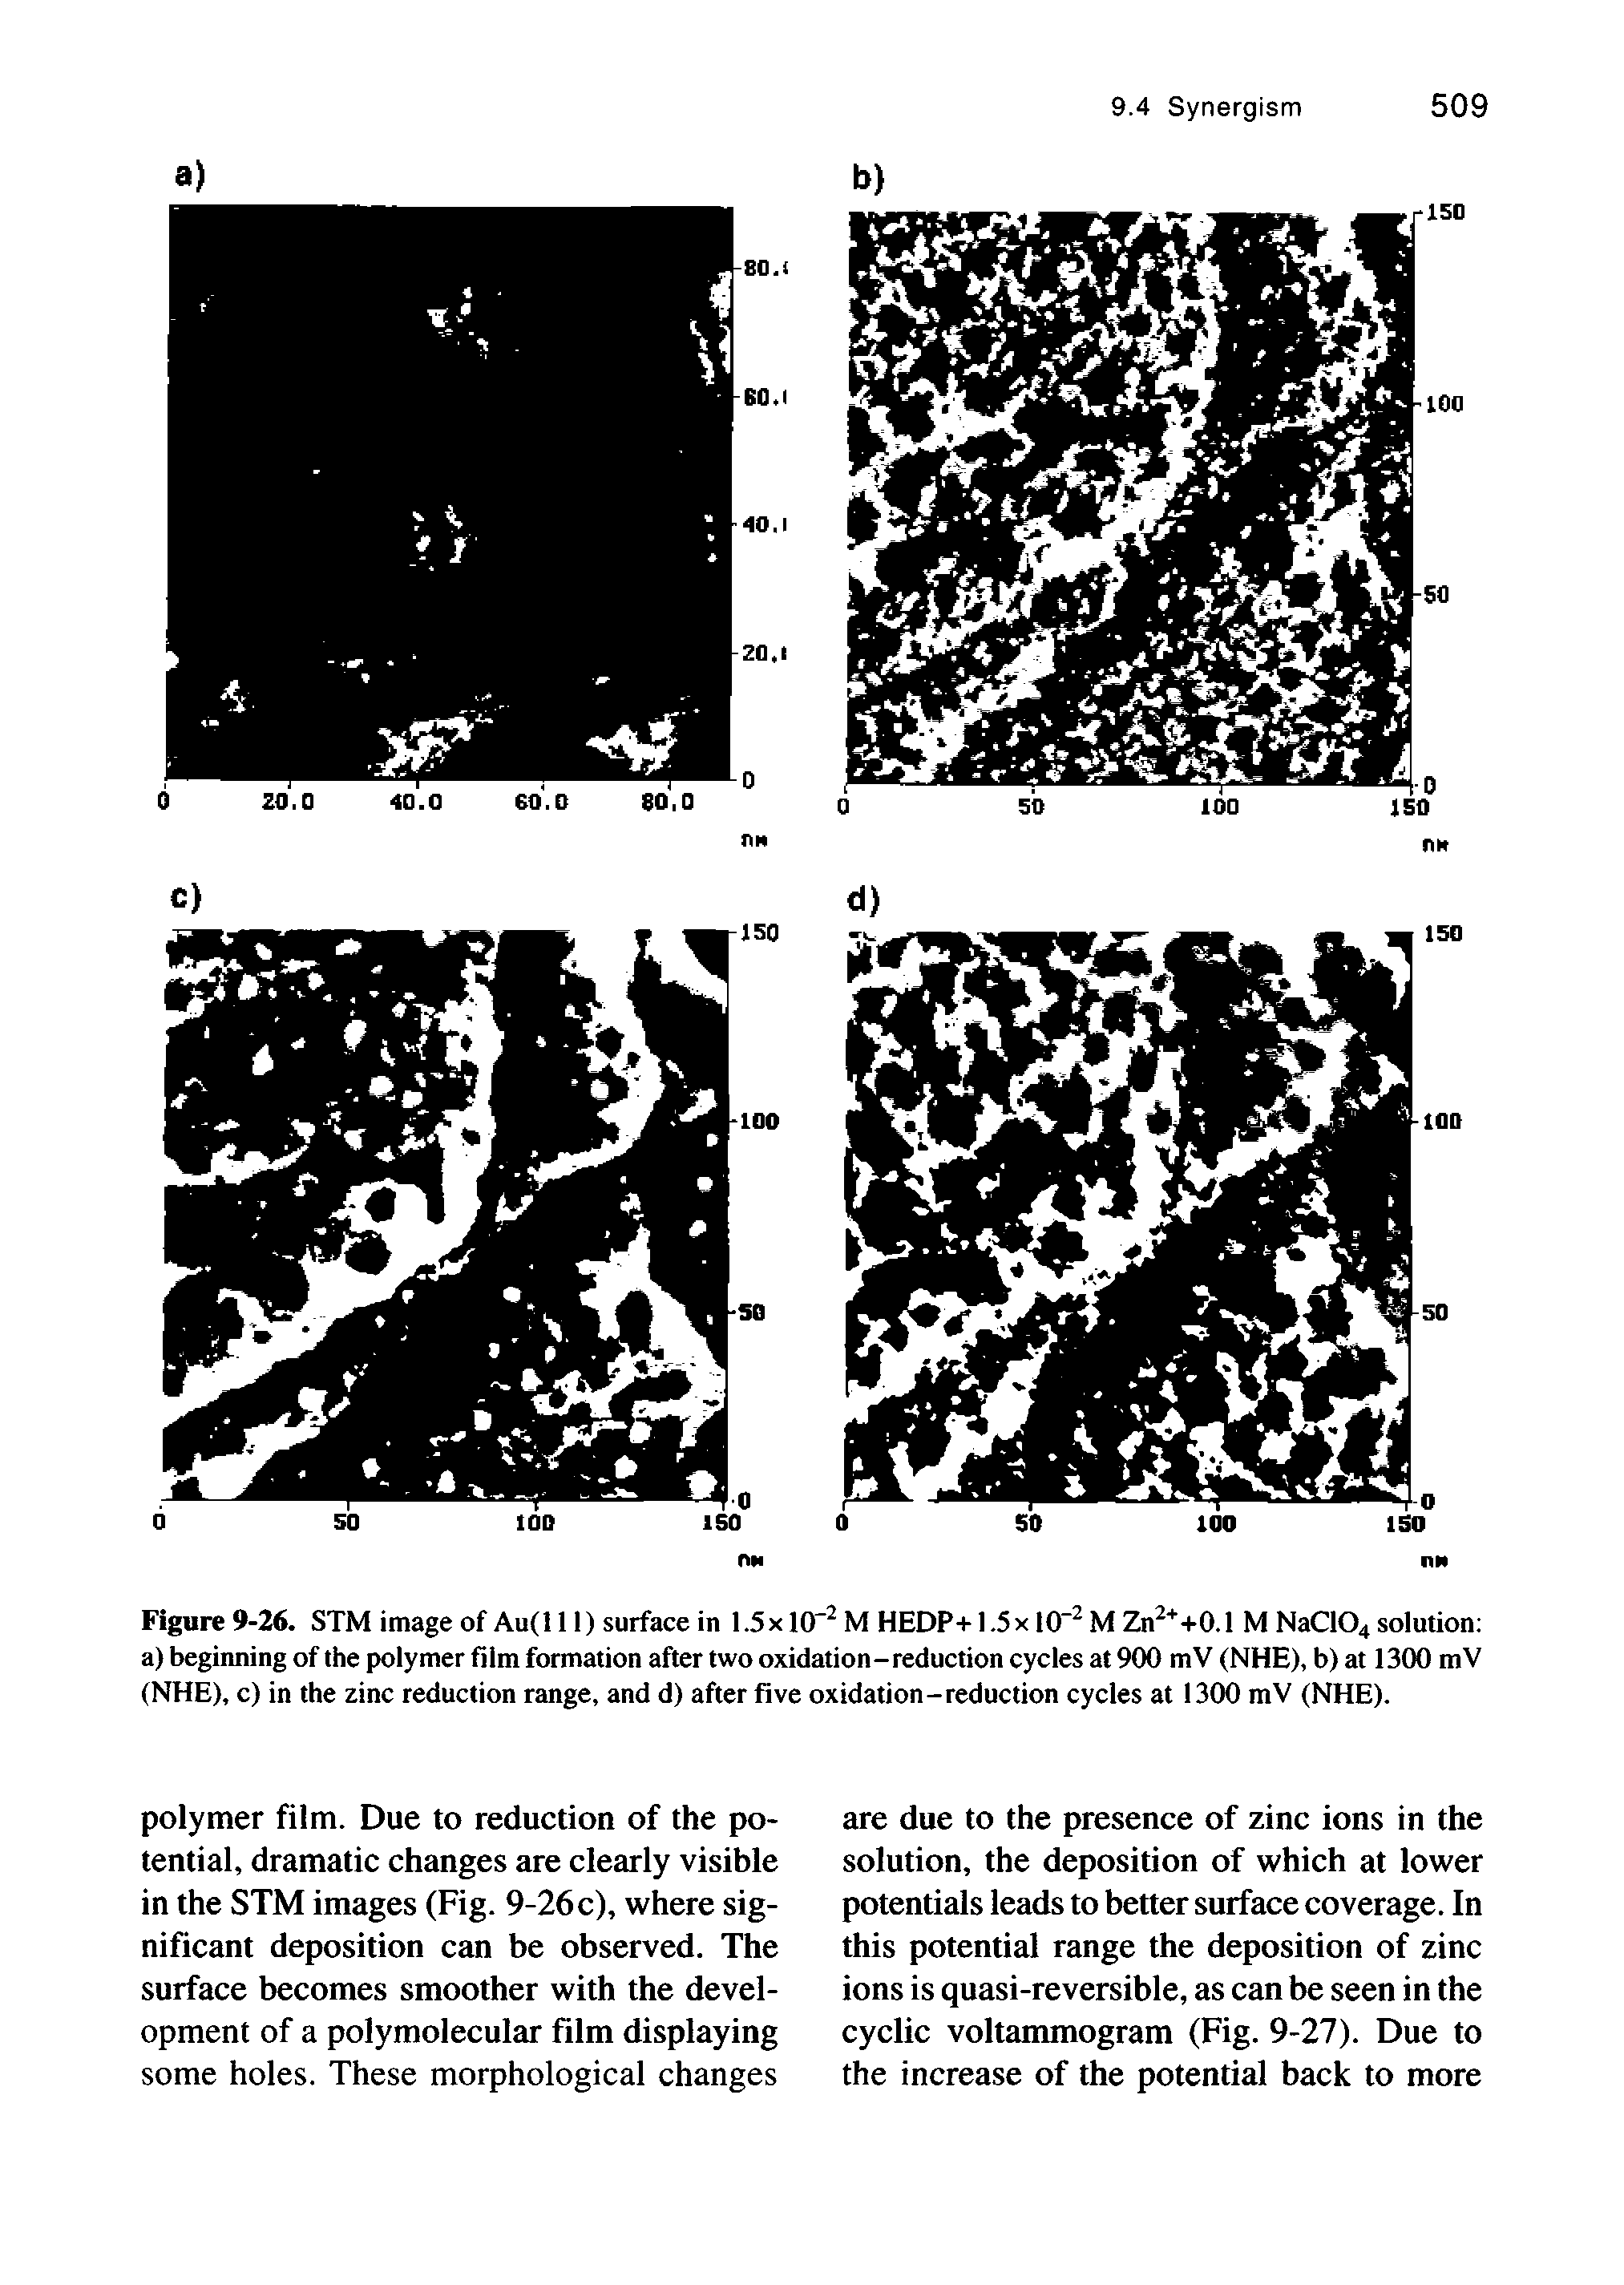 Figure 9-26. STM image of Au(ll I) surface in 1.5xl(T M HEDP+I.5x IO" MZn +0.1 M NaC104 solution a) beginning of the polymer film formation after two oxidation-reduction cycles at 900 mV (NHE), b) at 1300 mV (NHE), c) in the zinc reduction range, and d) after five oxidation-reduction cycles at 1300 mV (NHE).